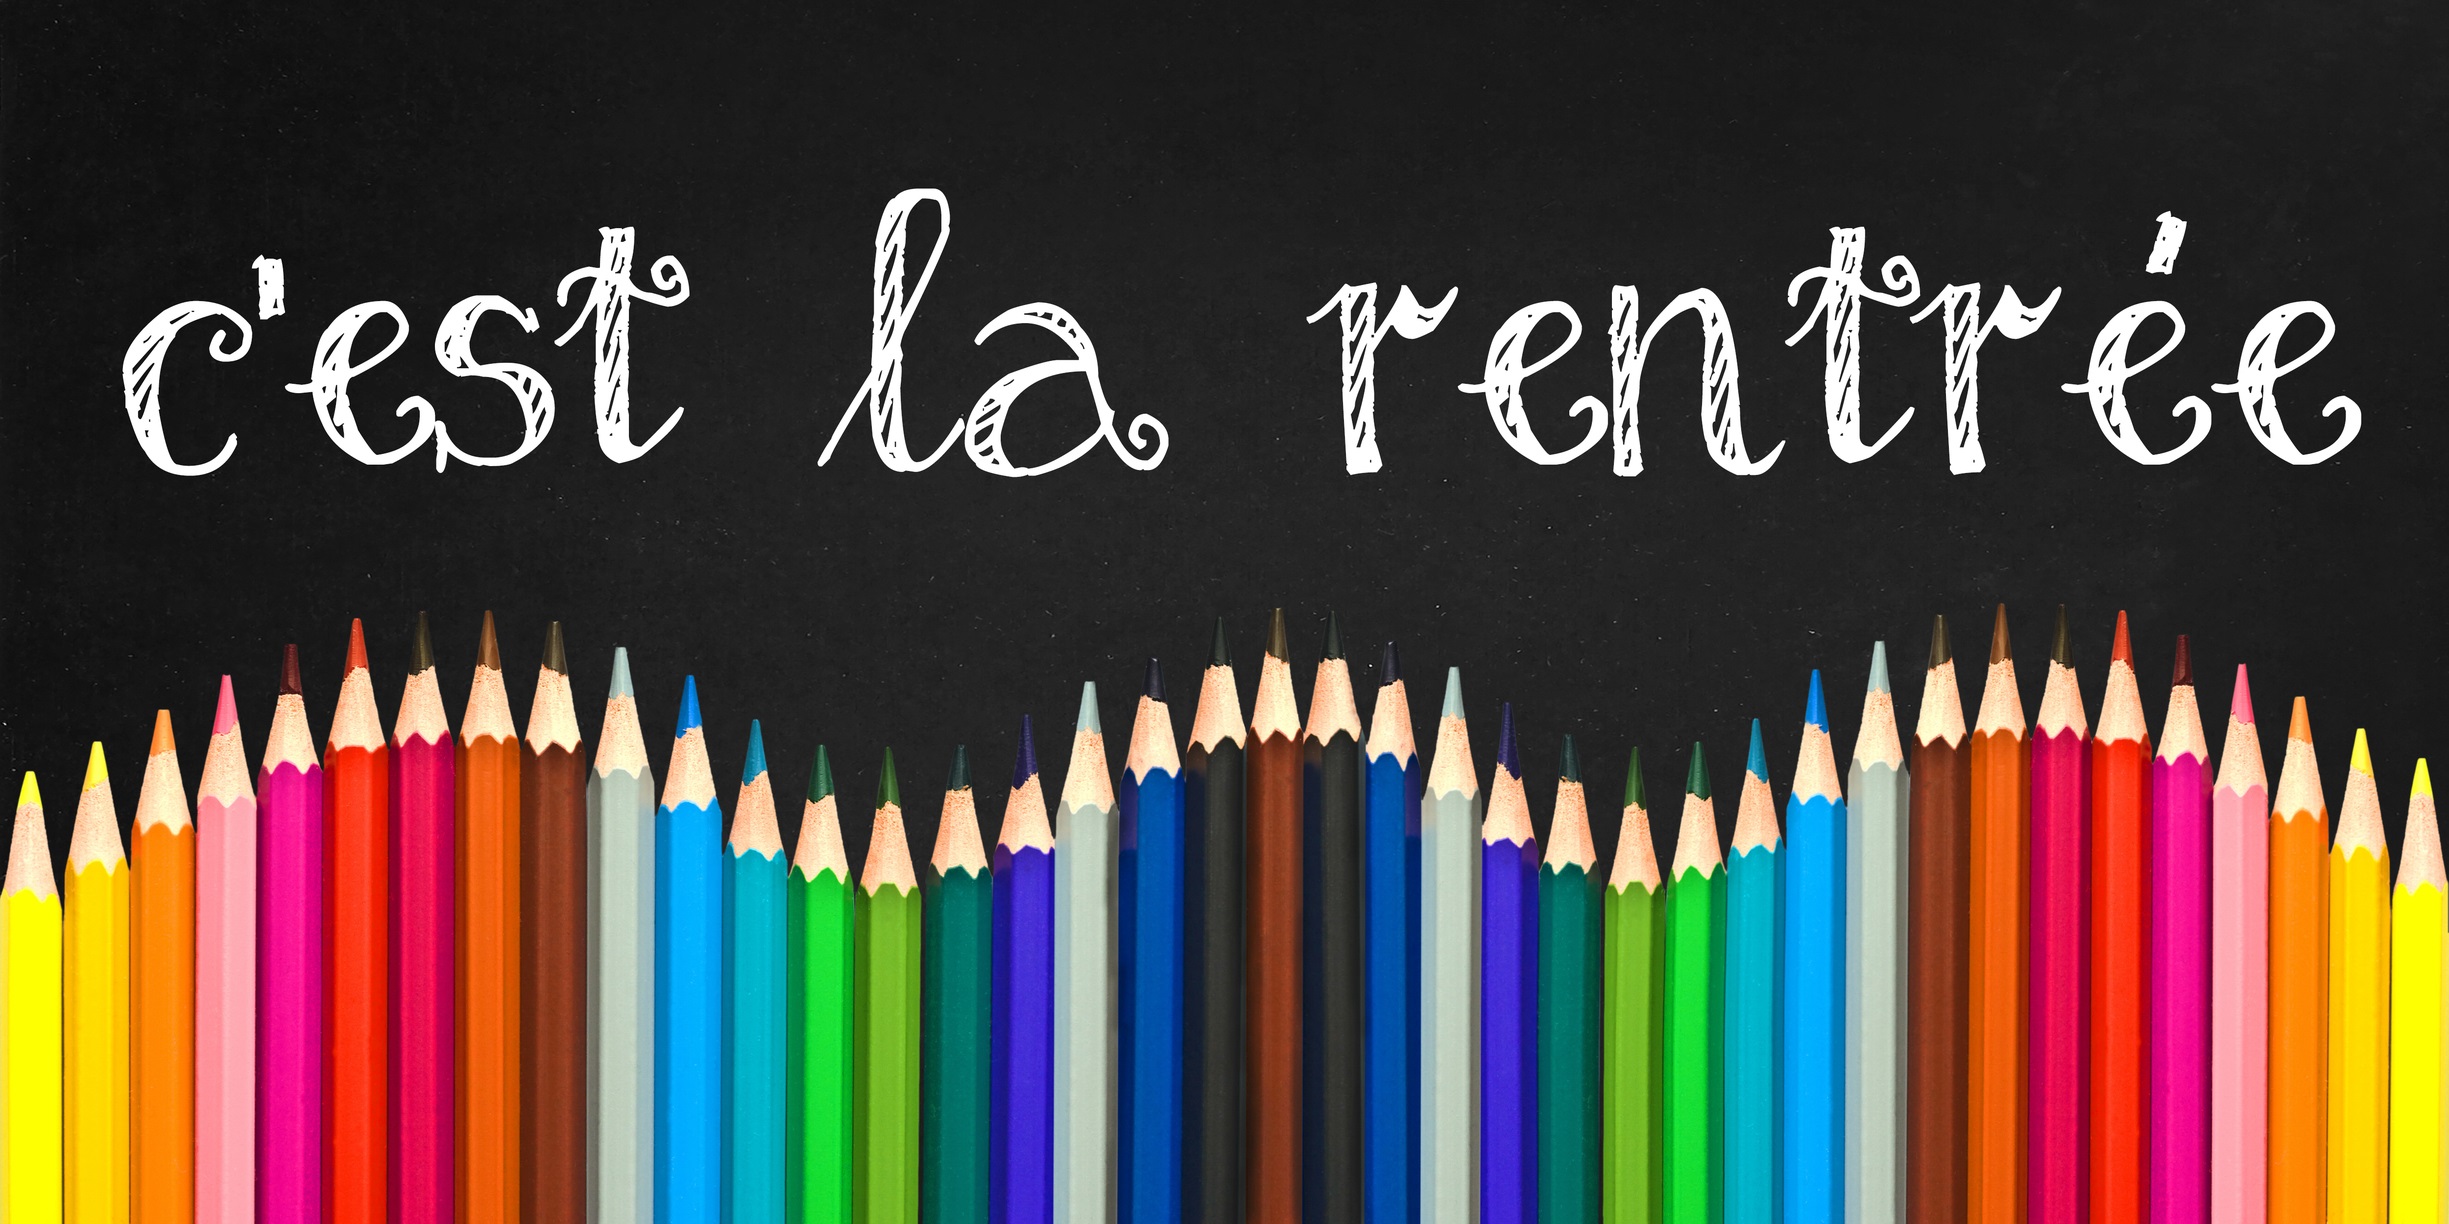 C'est la rentree (meaning Back to schoo in french) written on a black board background with a wave of colorful wooden pencils